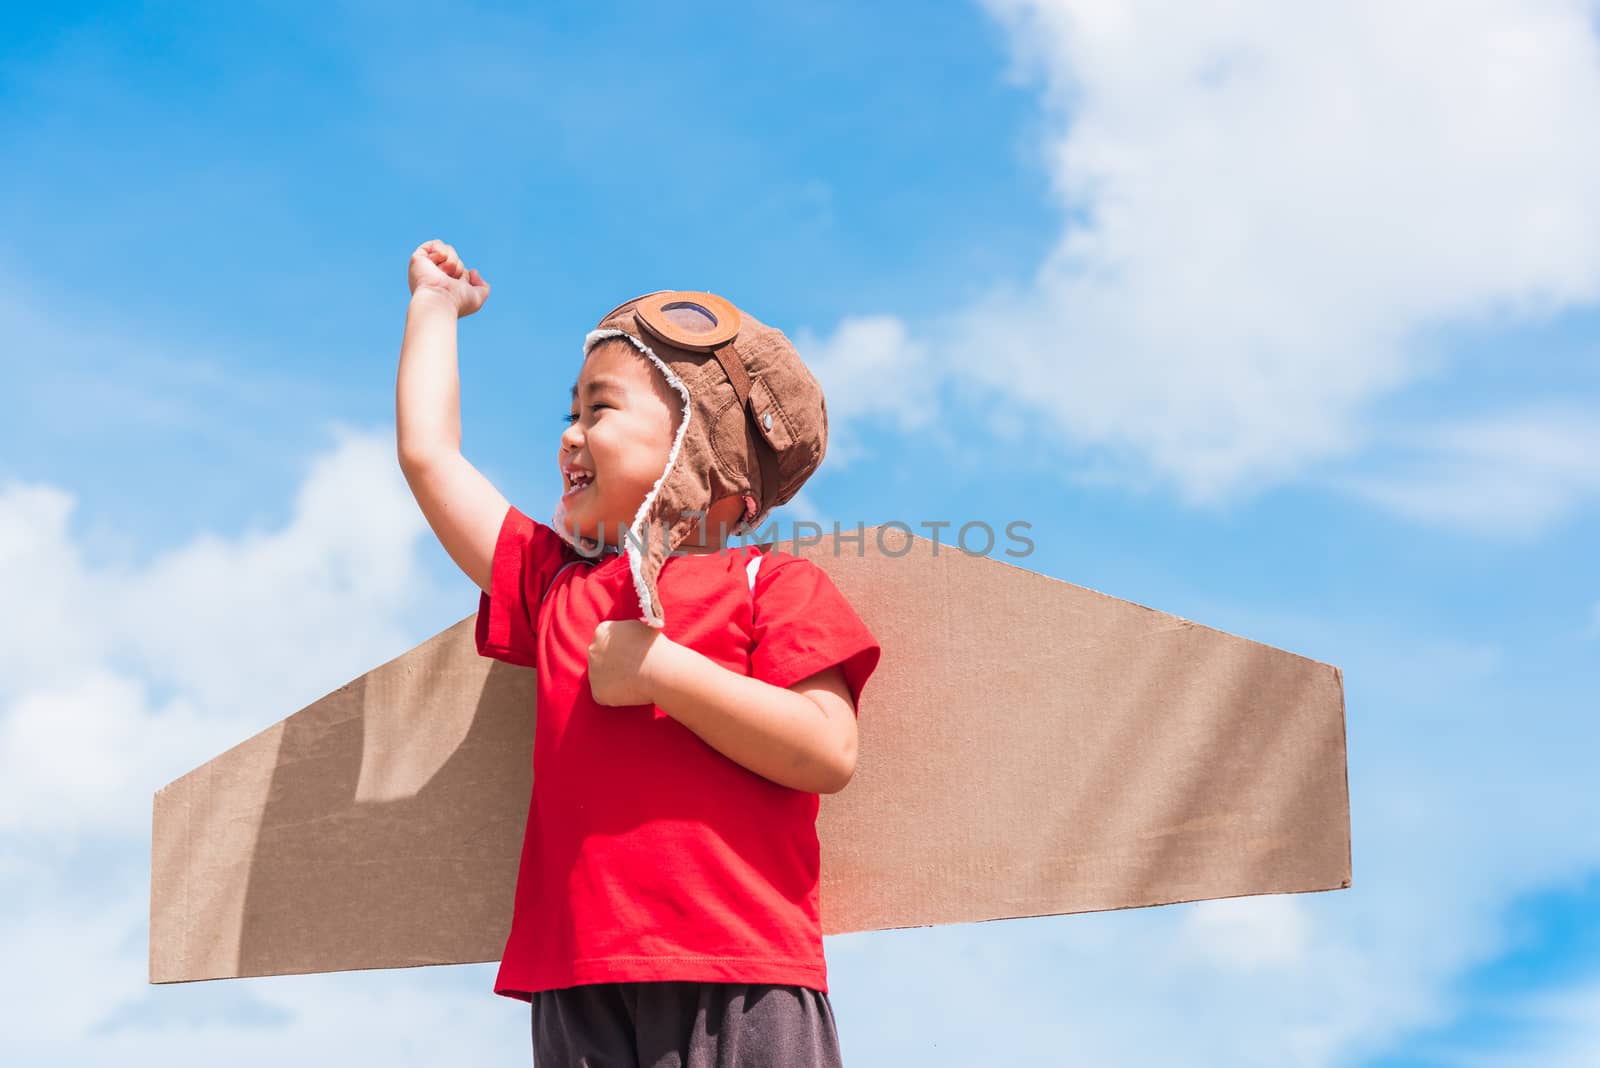 Happy Asian funny child or kid little boy smile wear pilot hat and goggles play toy cardboard airplane wing flying raises hand up against summer blue sky cloud background, Startup freedom concept